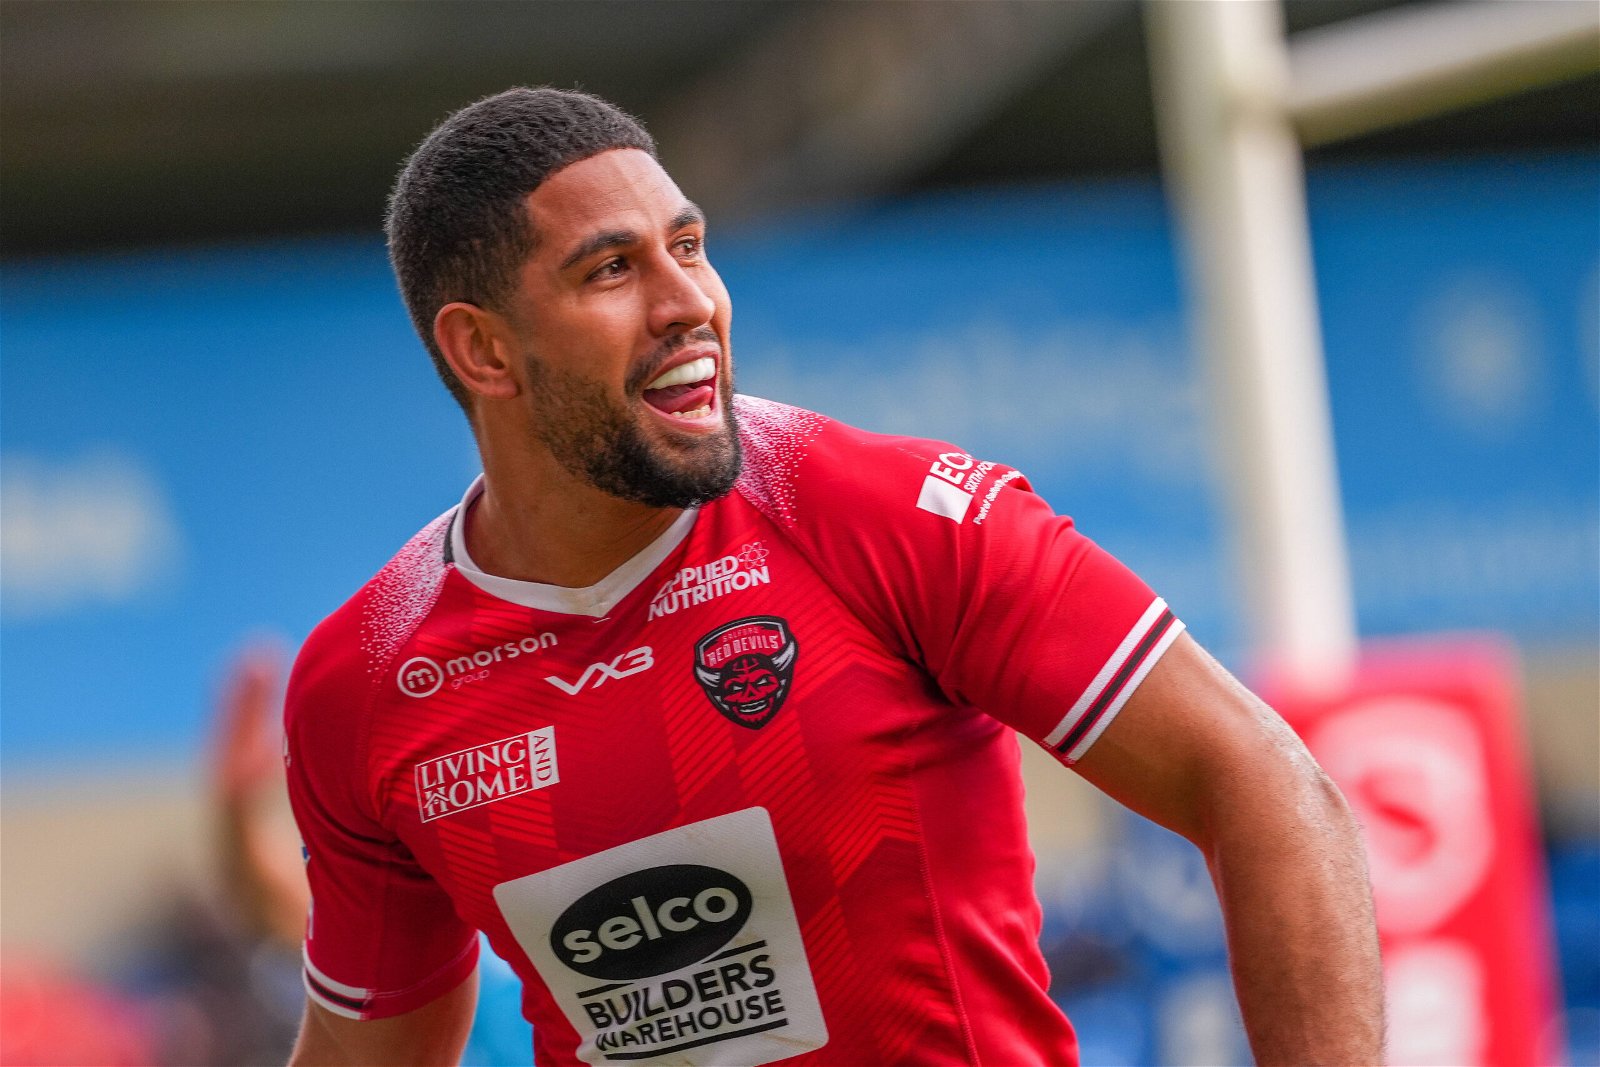 Nene Macdonald, while we're attempting to look at his shirt, celebrates a try.His shirt is red. There's a tiny gradient from white to red coming off the sides of the collar and I'm really sorry but I don't really know how else to describe it. The Selco logo is in a big white box. 